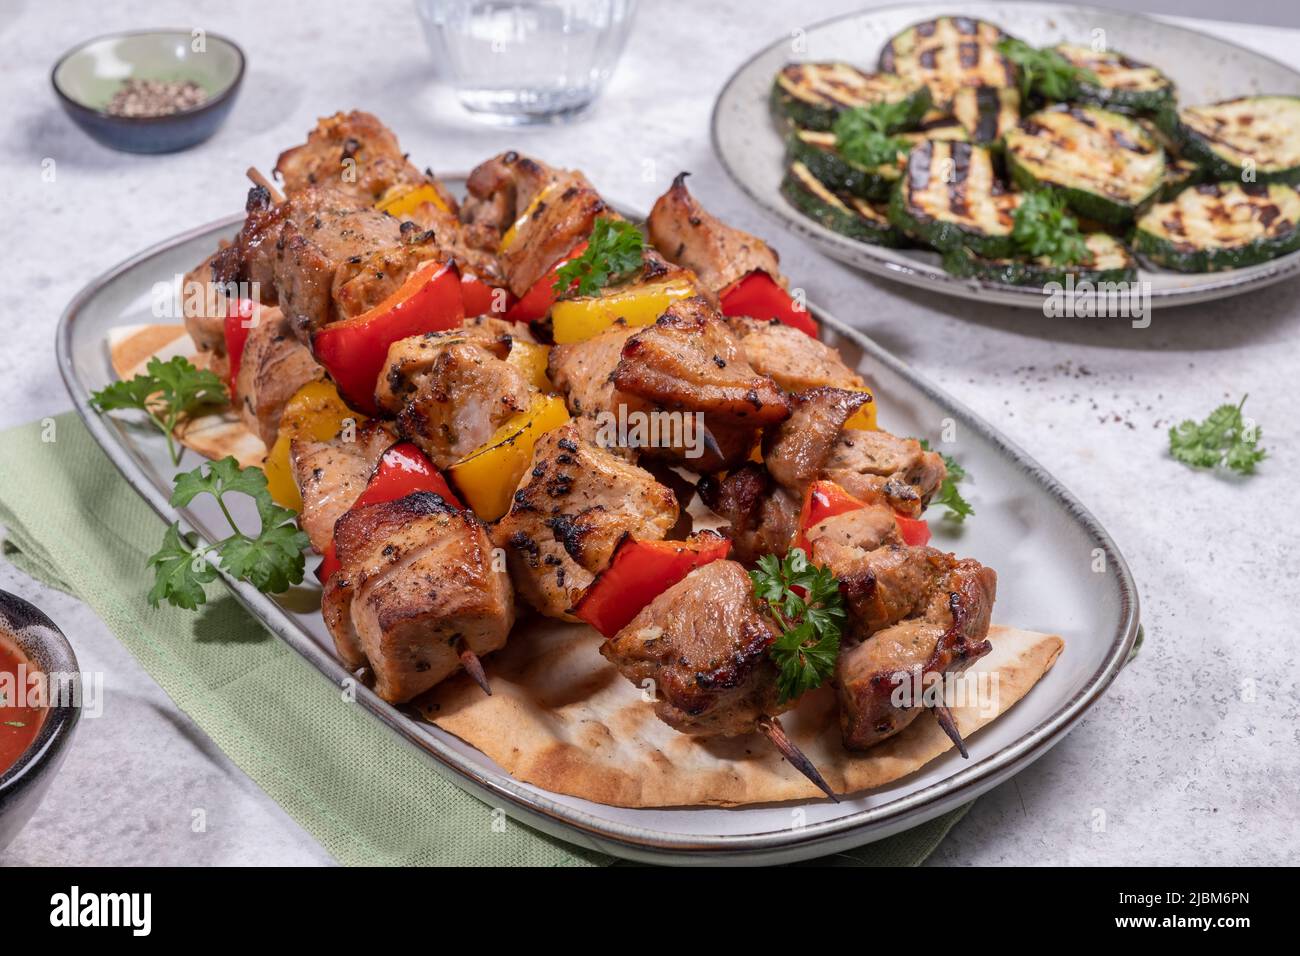 Grilled pork kebab with red and yellow pepper Stock Photo